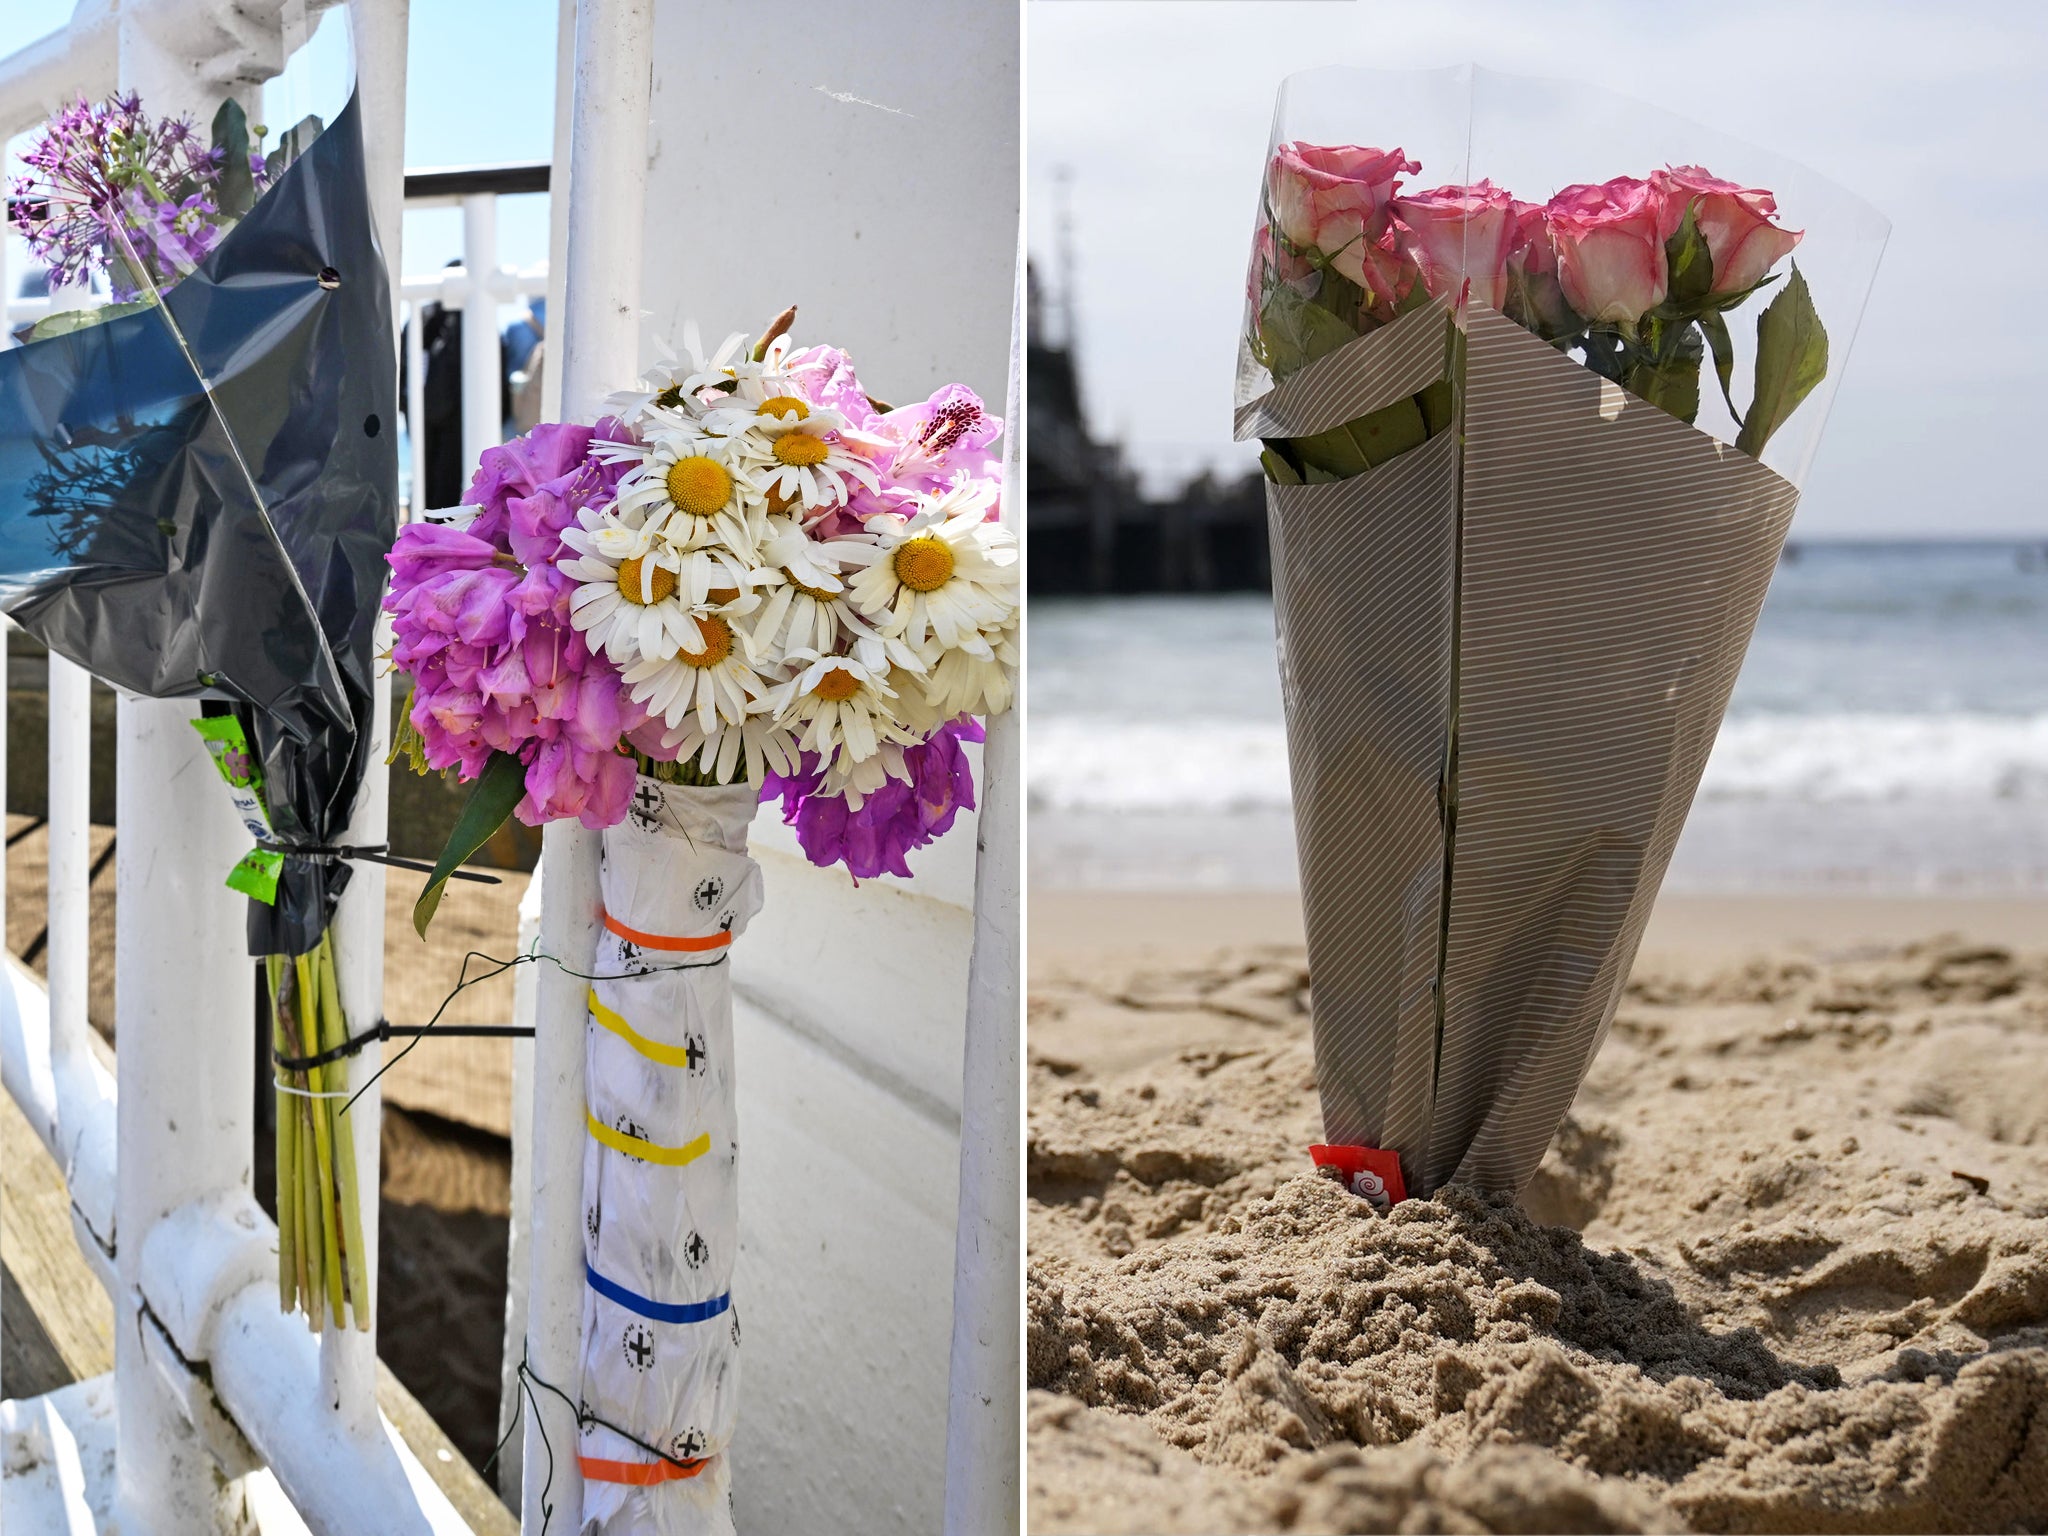 Flowers left in tribute on the beach